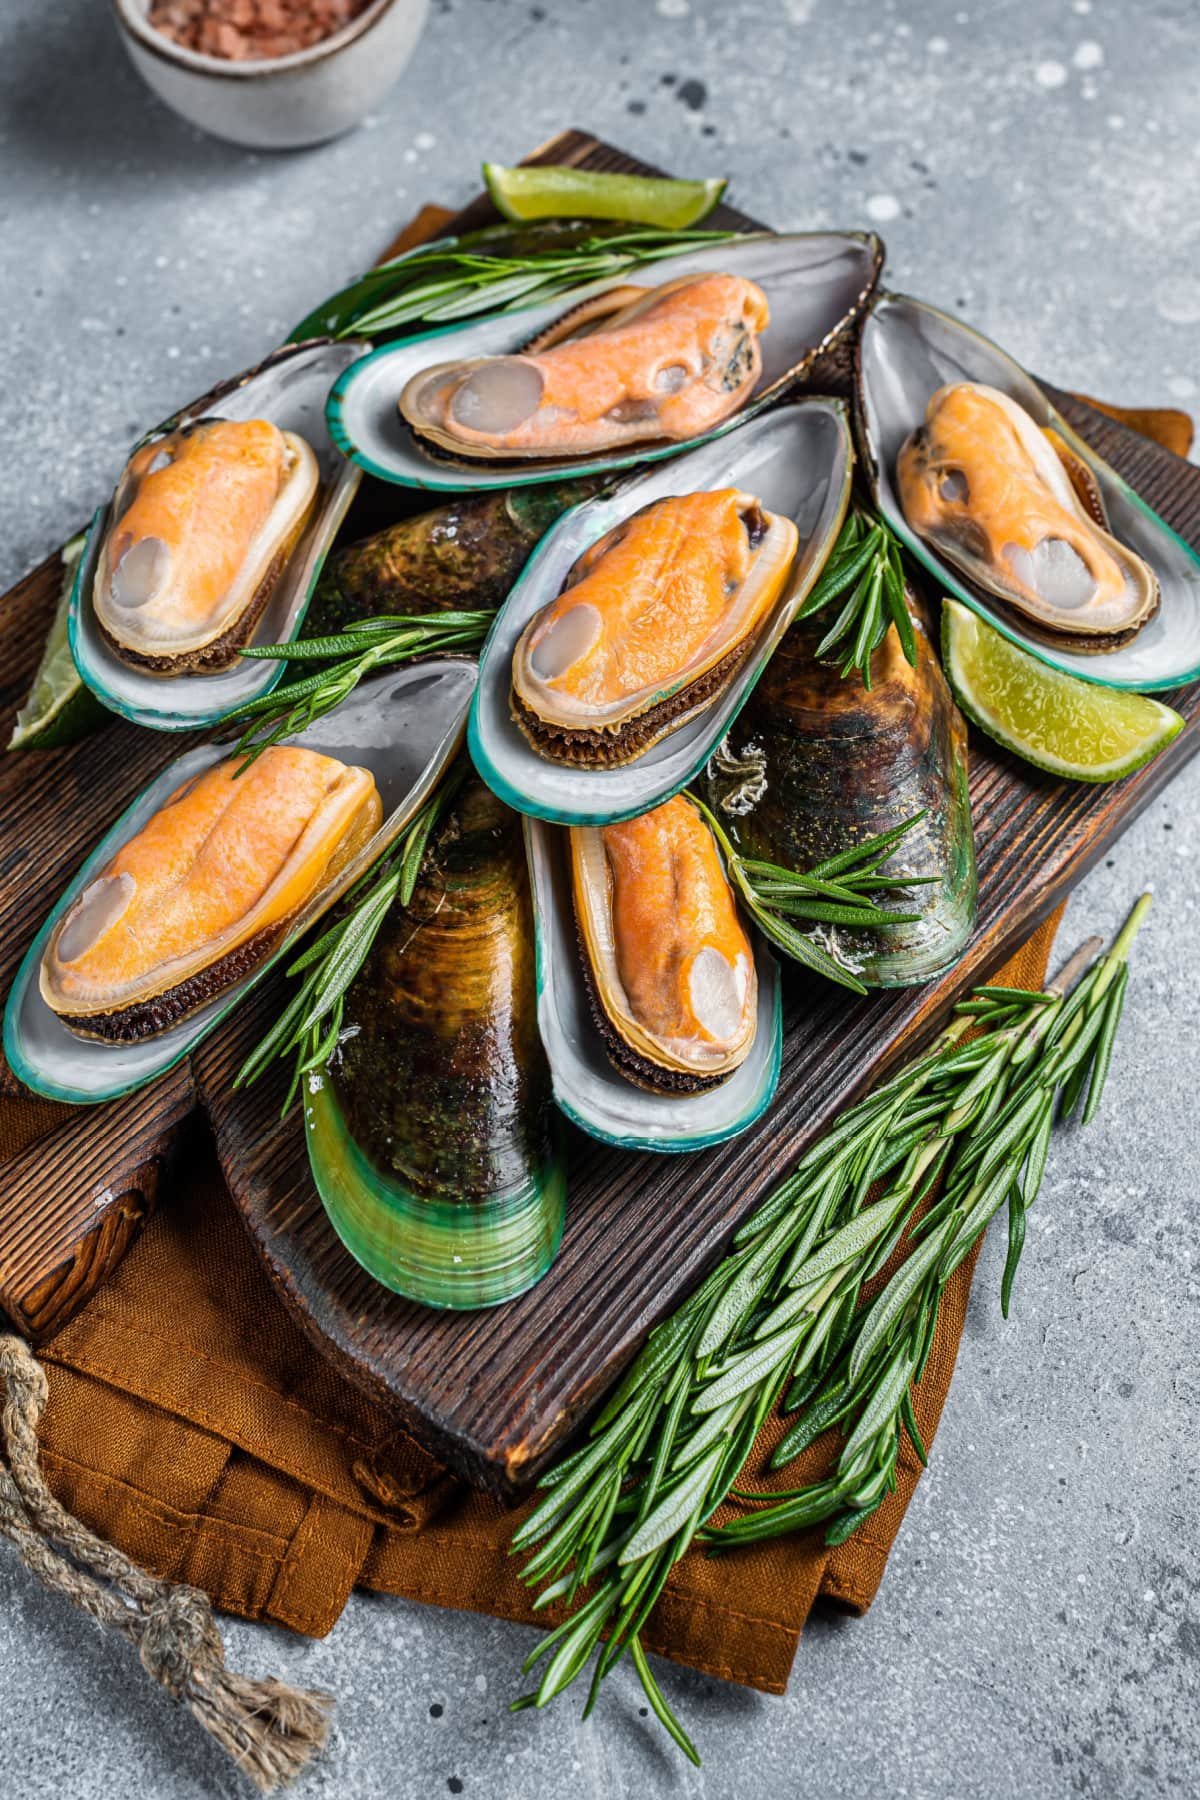 Cooked Green Mussels with Lime and Thyme Leaves on a Wooden Cutting Board